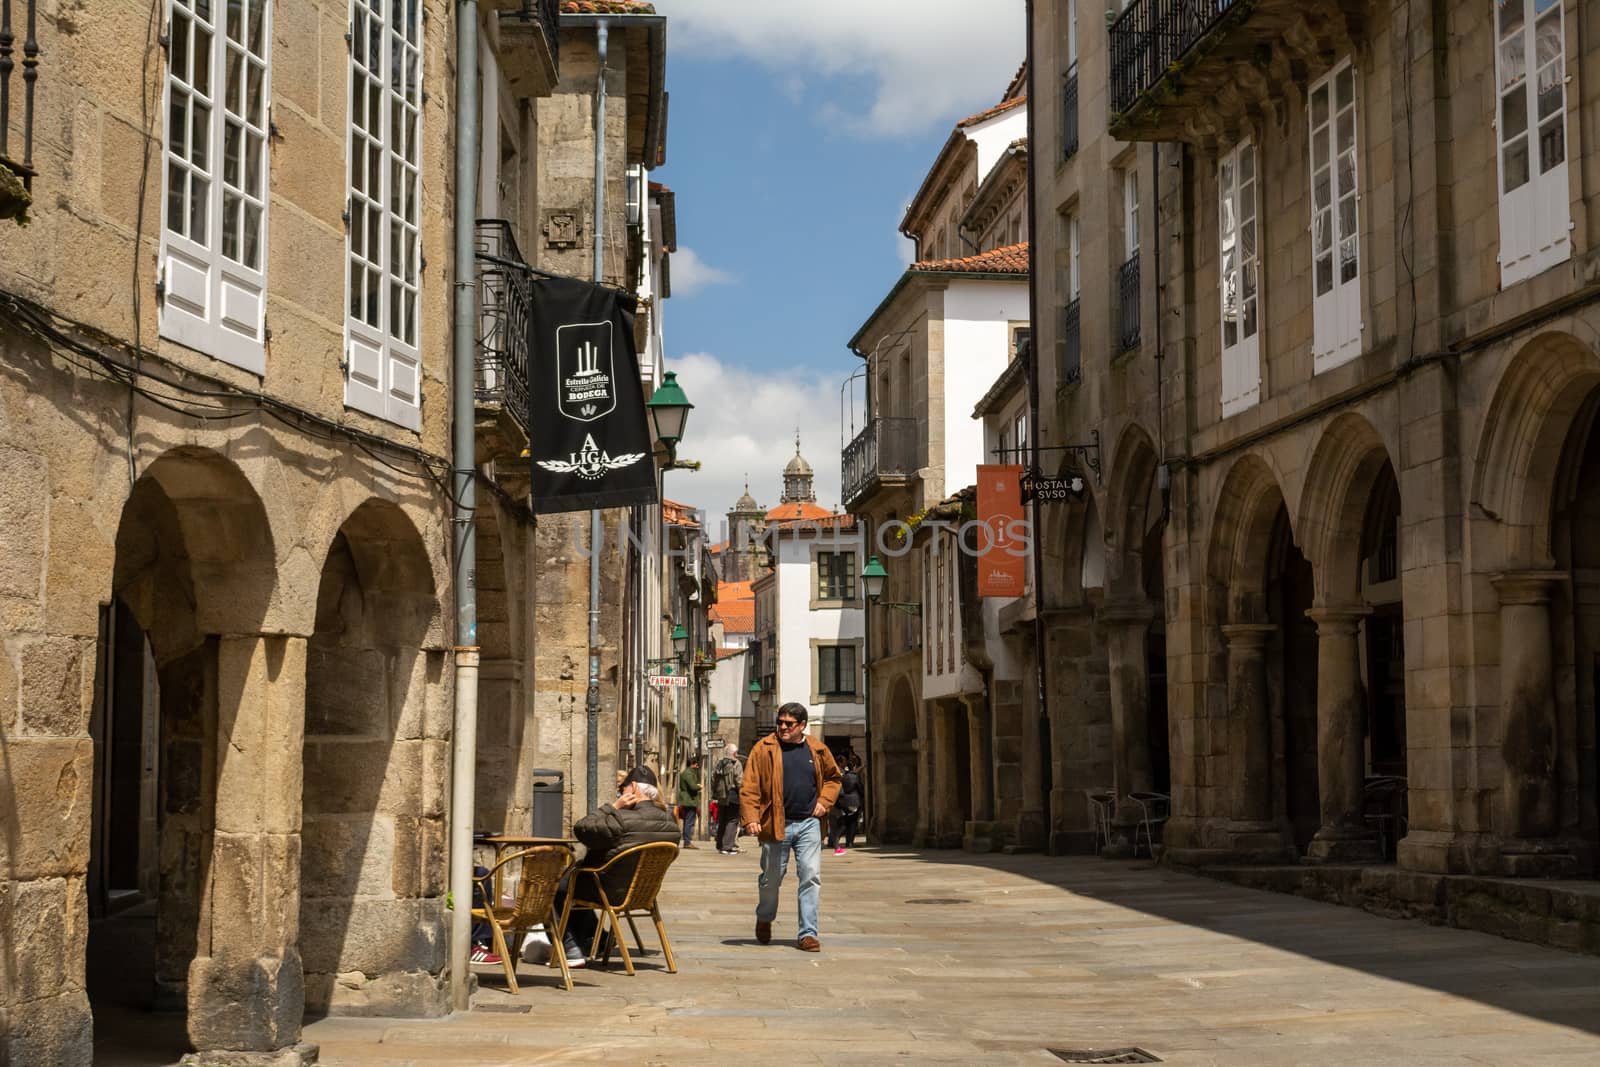 View on the arcade streets of the old town of Santiago de Compostela in Spain by kb79